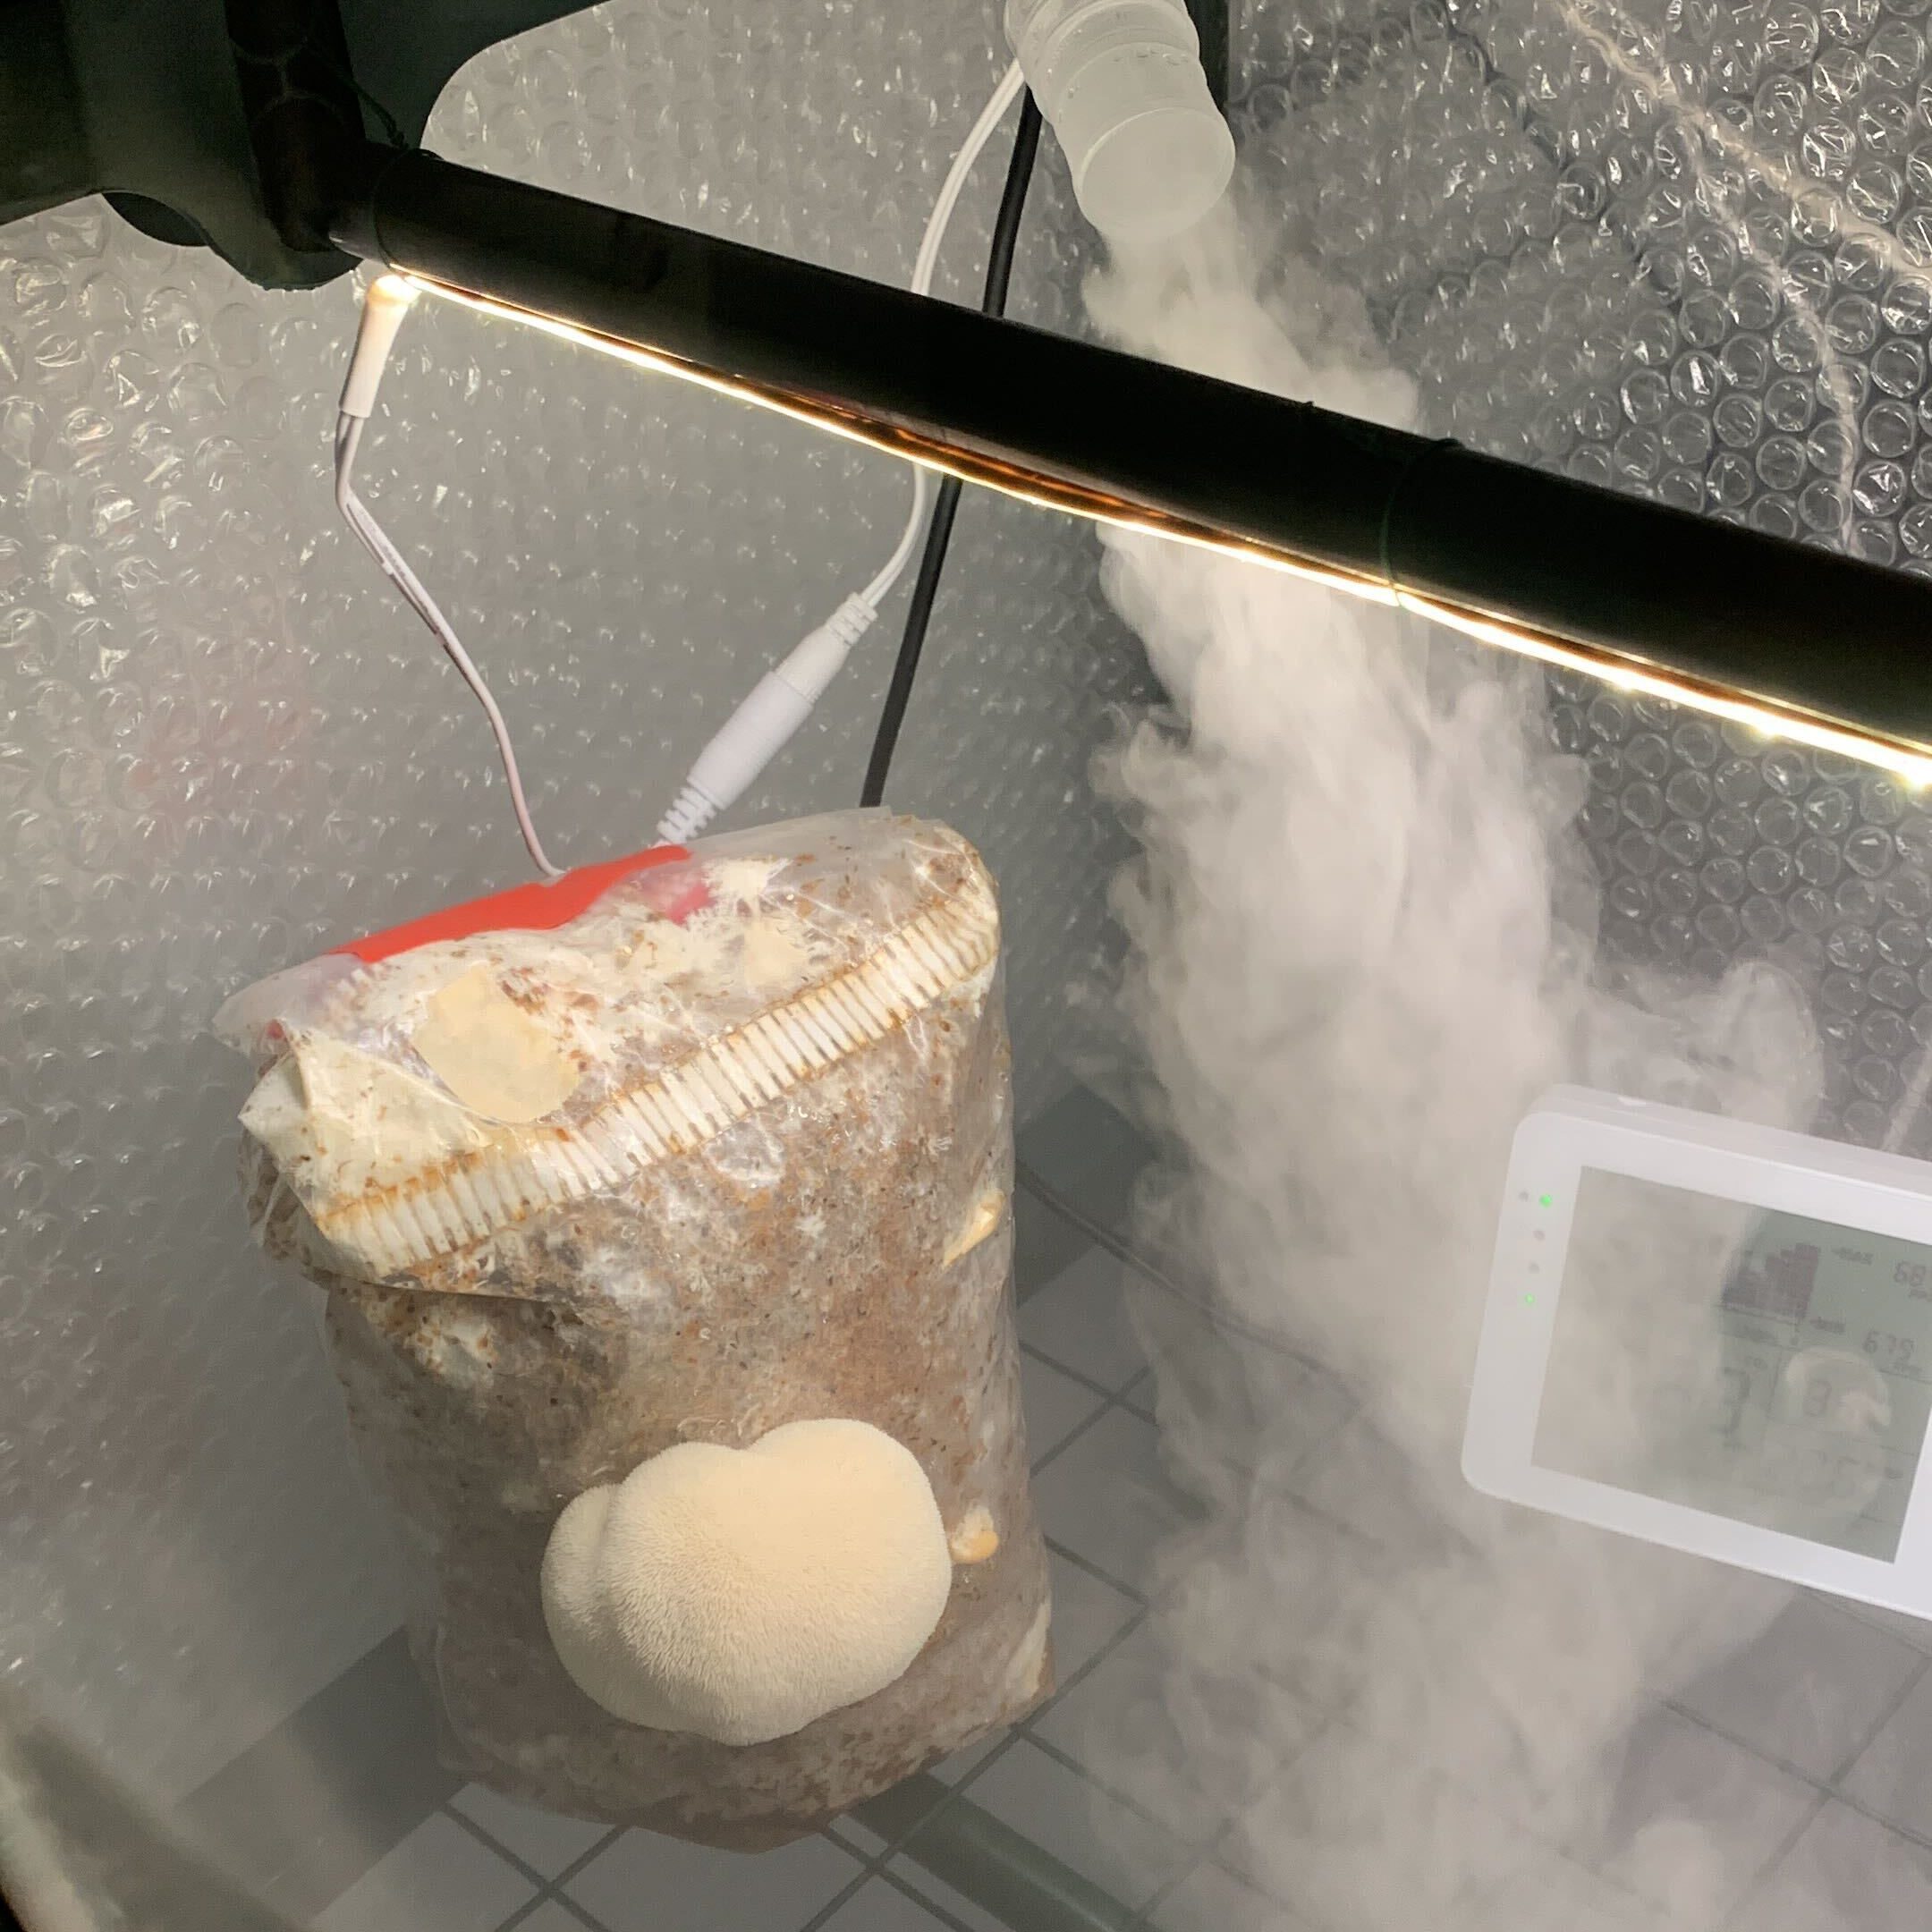 Cultivated mushrooms in a fruiting chamber